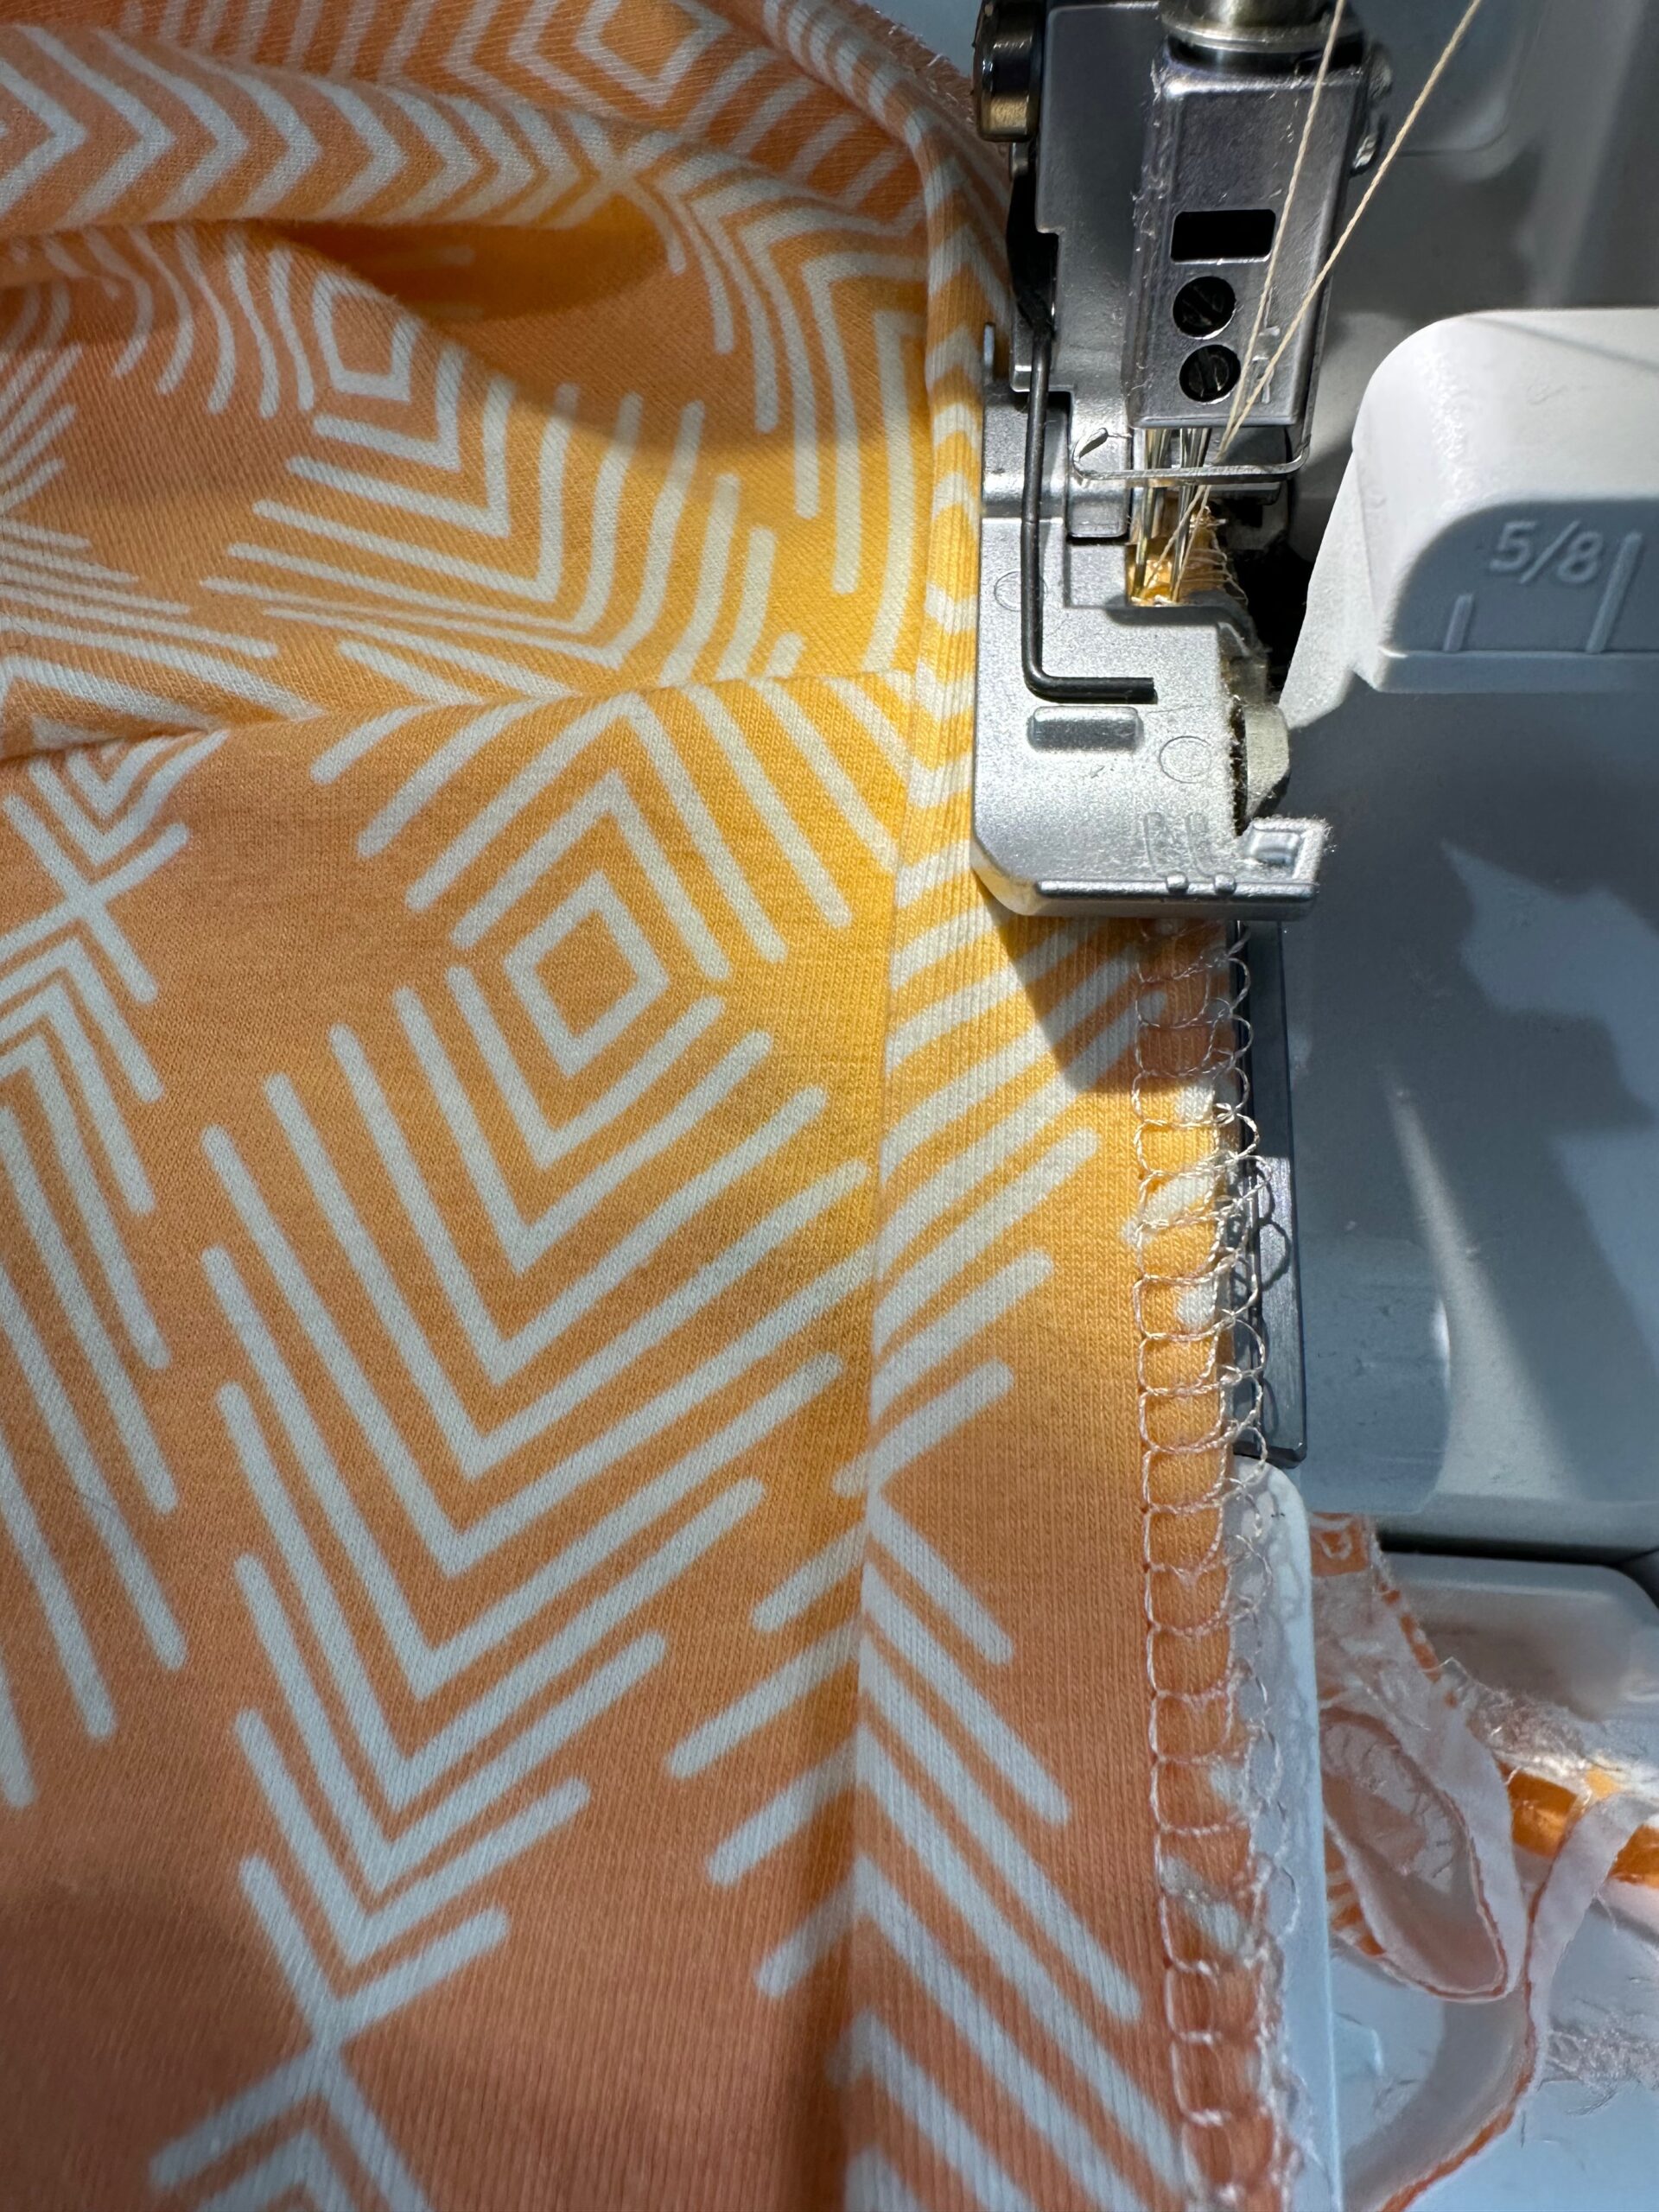 Tips for Sewing With Knit Fabrics, Blog